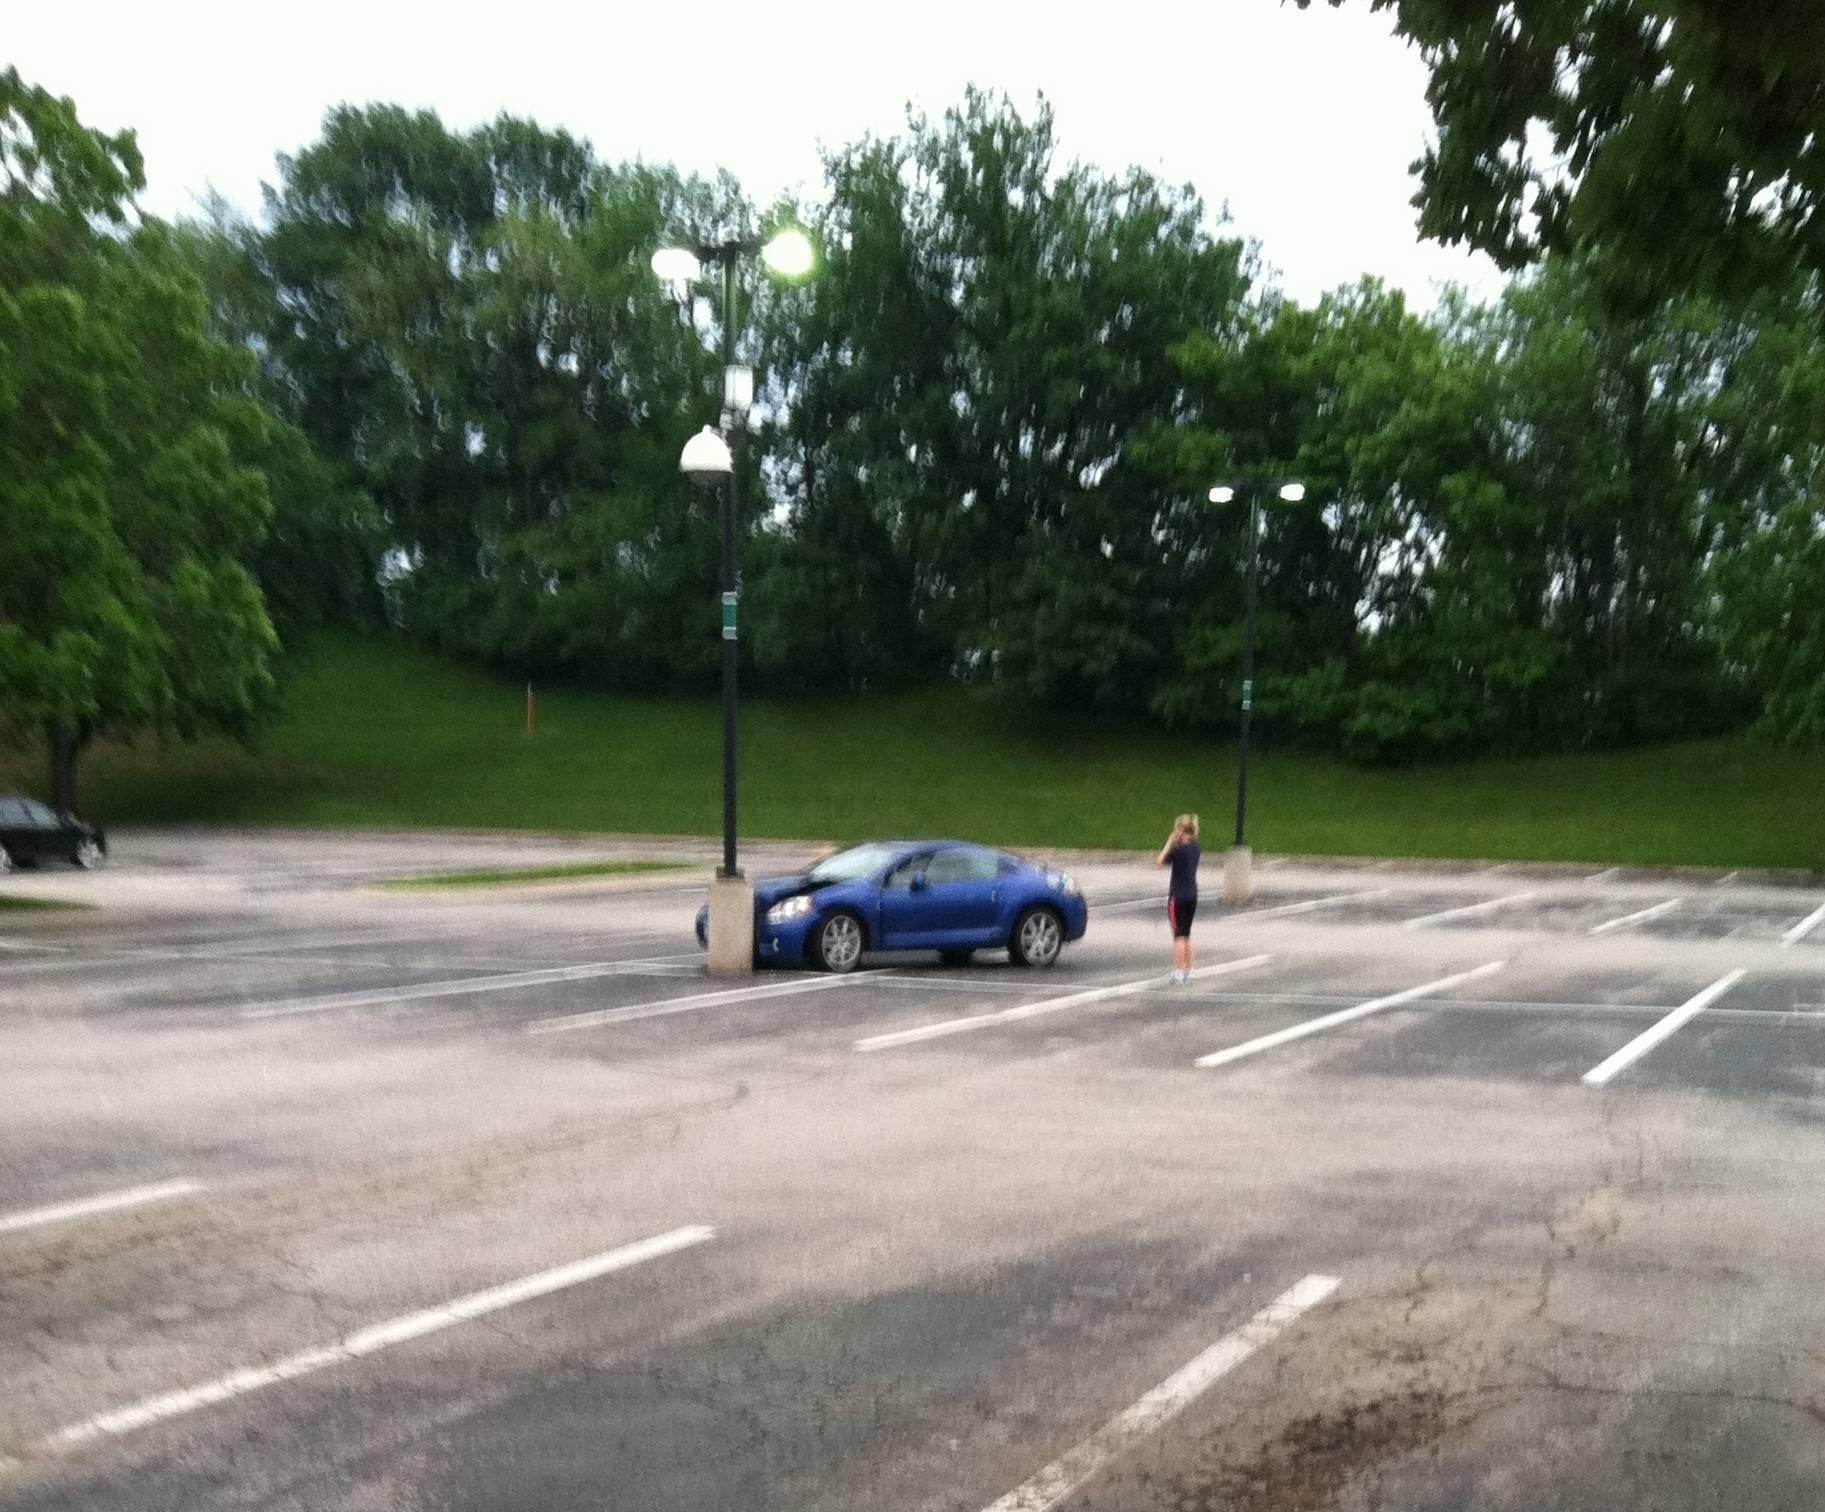 how could this happen in a f...ing empty parking lot?